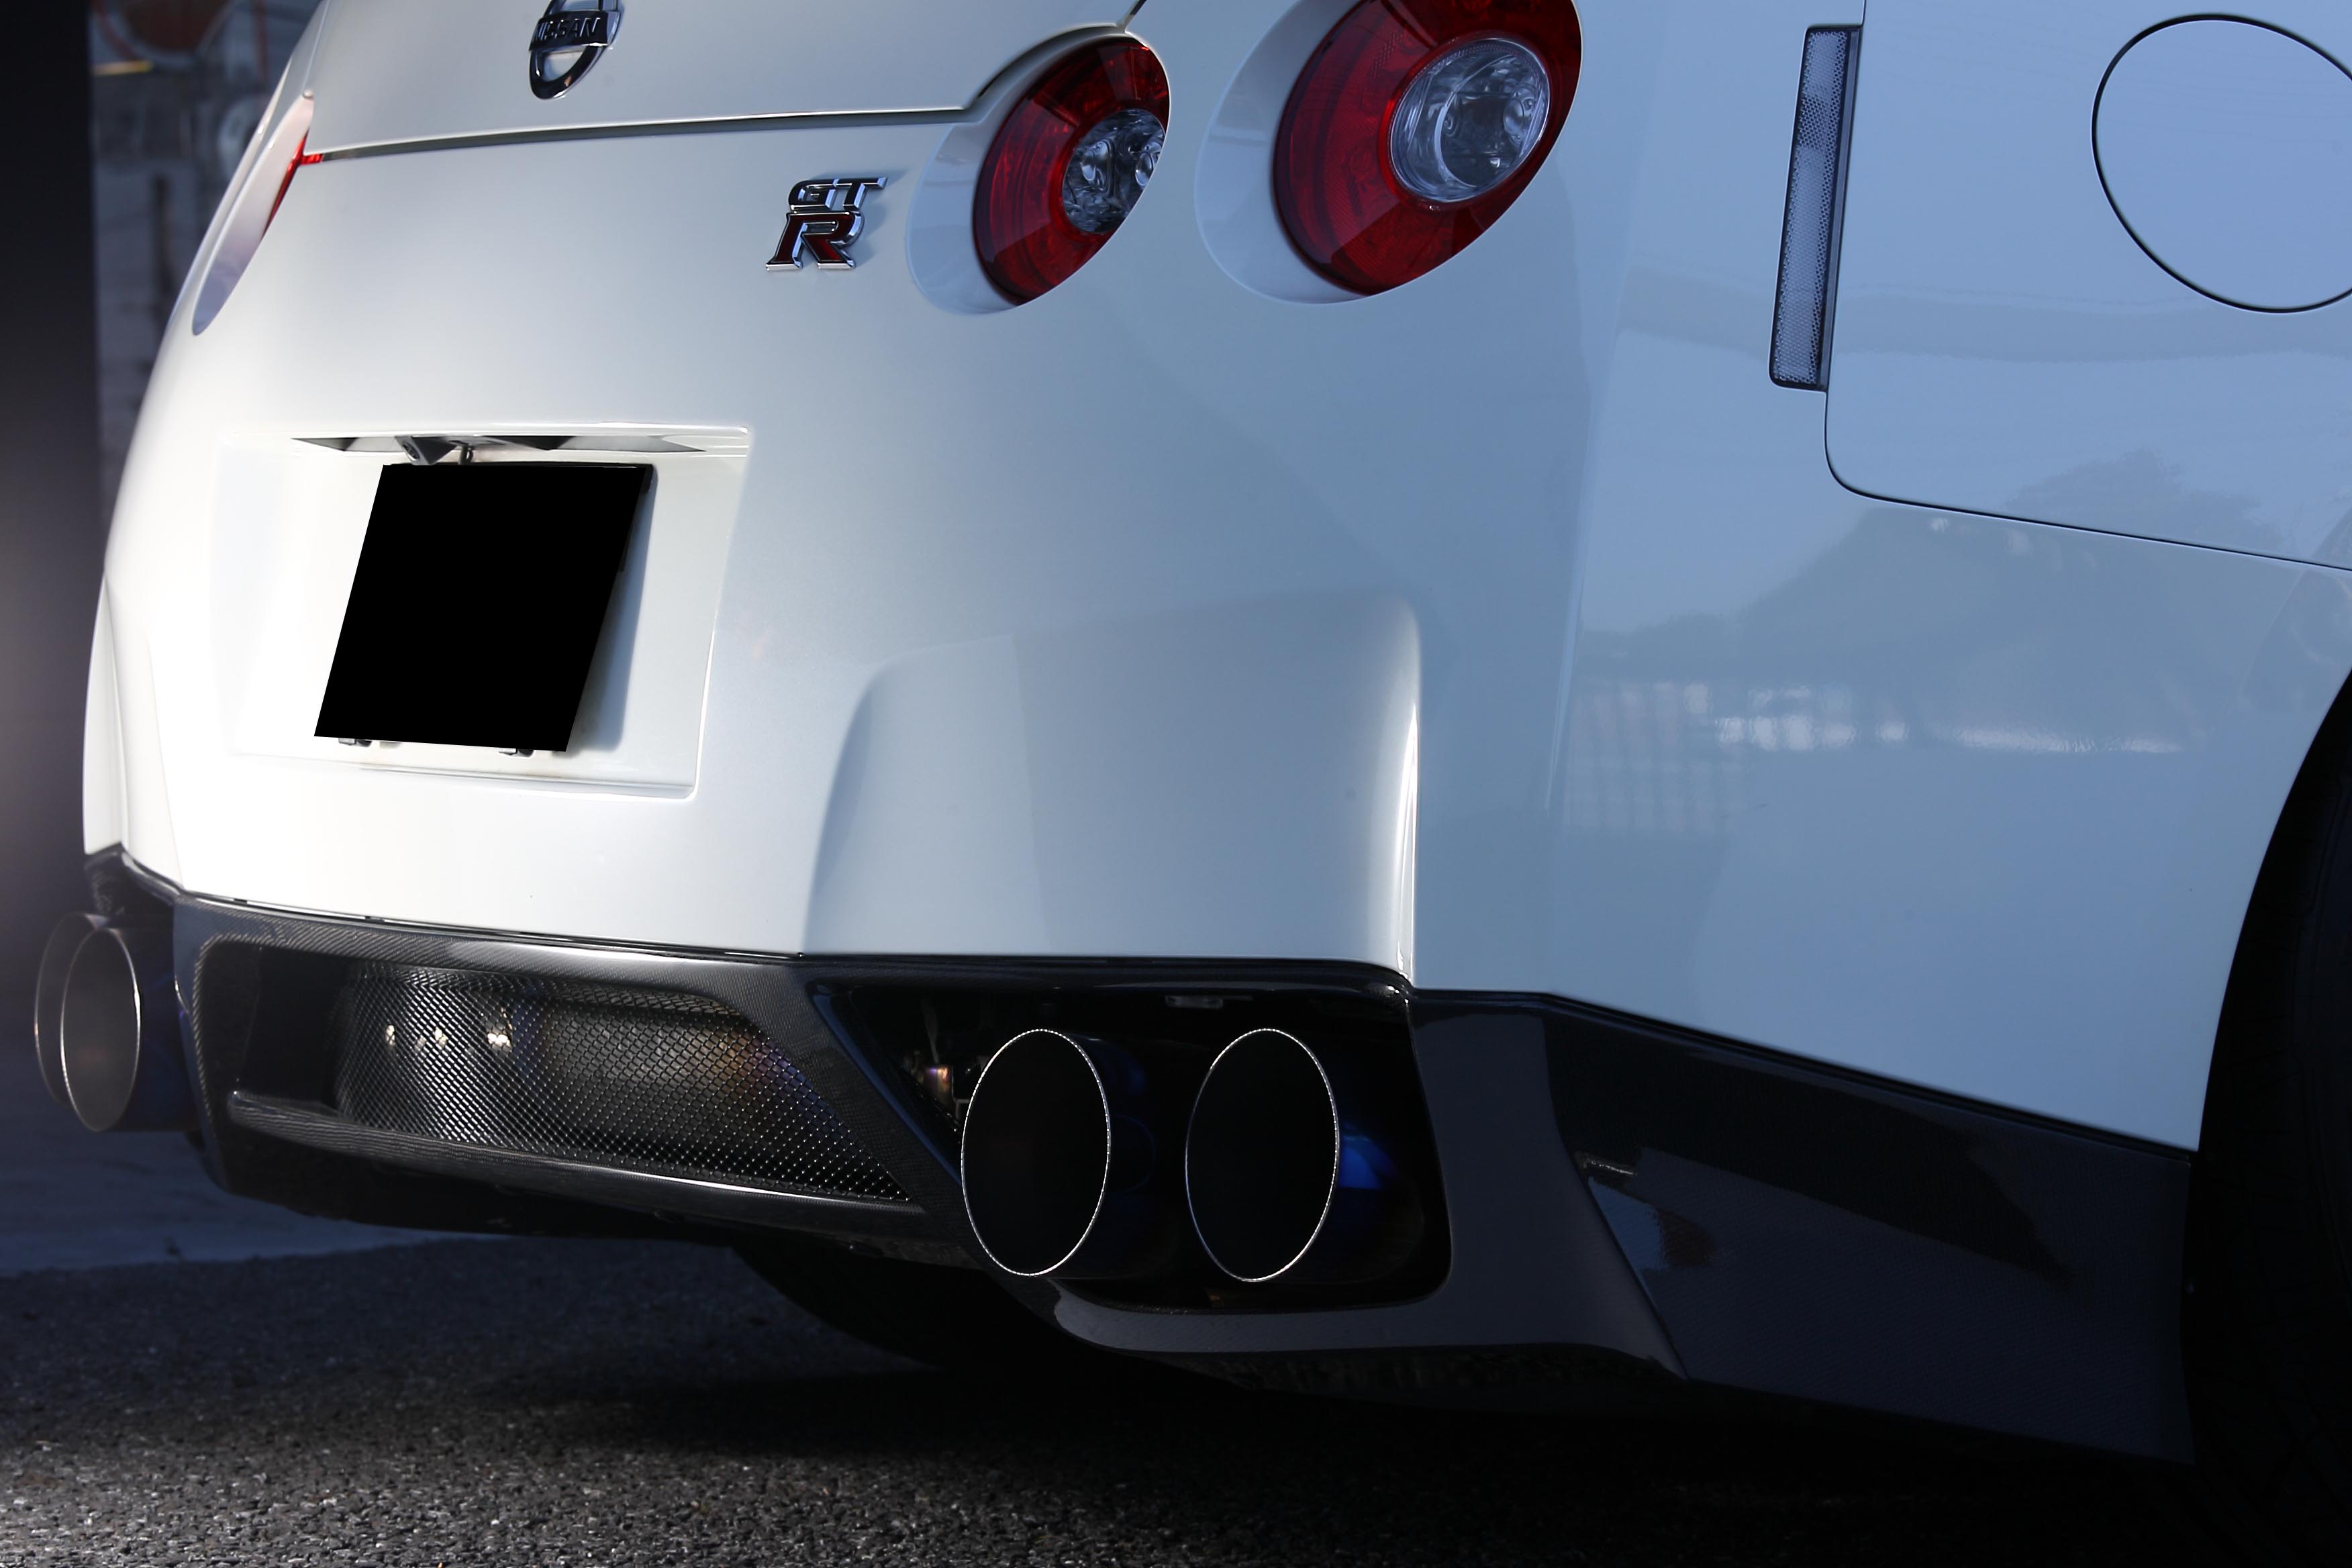 Check our price and buy VeilSide body kit for Nissan GT-R!